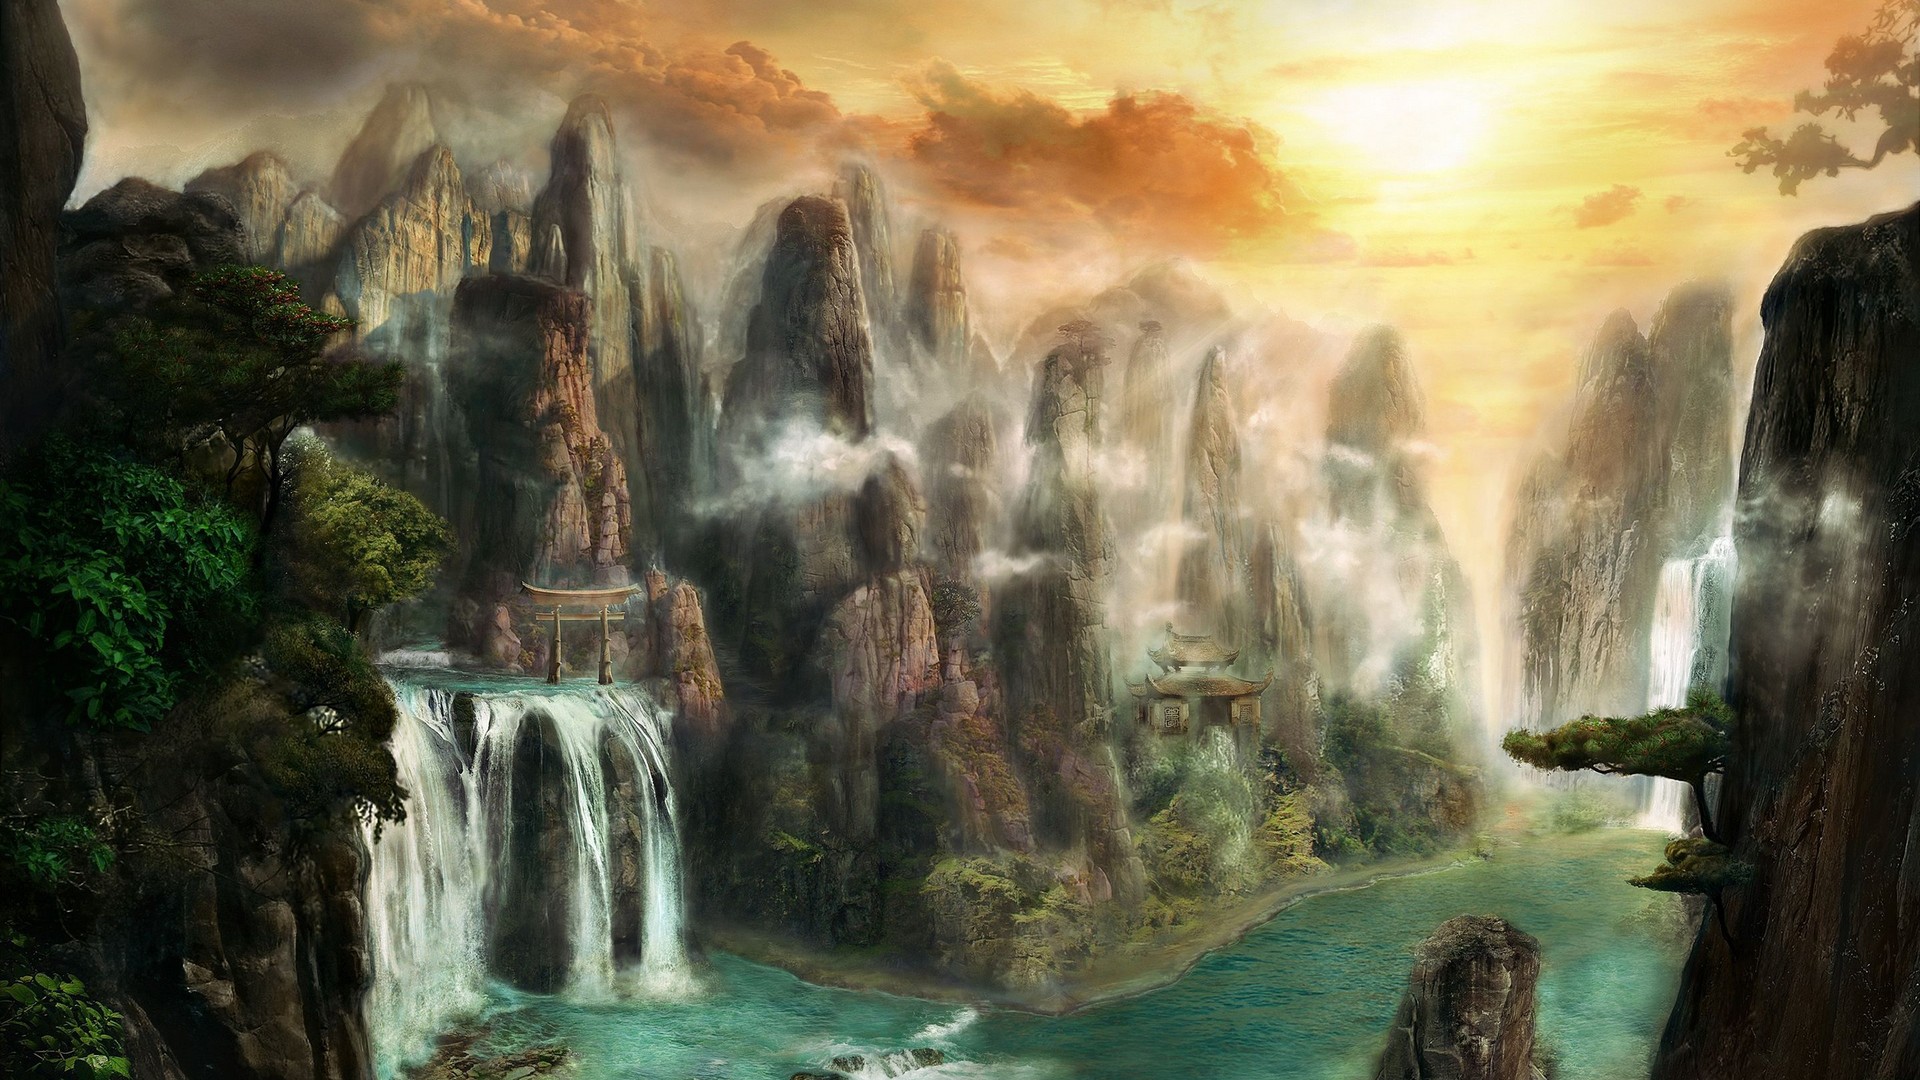 Fantasy Art Wallpaper For Desktop With high-resolution 1920X1080 pixel. You can use this wallpaper for your Windows and Mac OS computers as well as your Android and iPhone smartphones